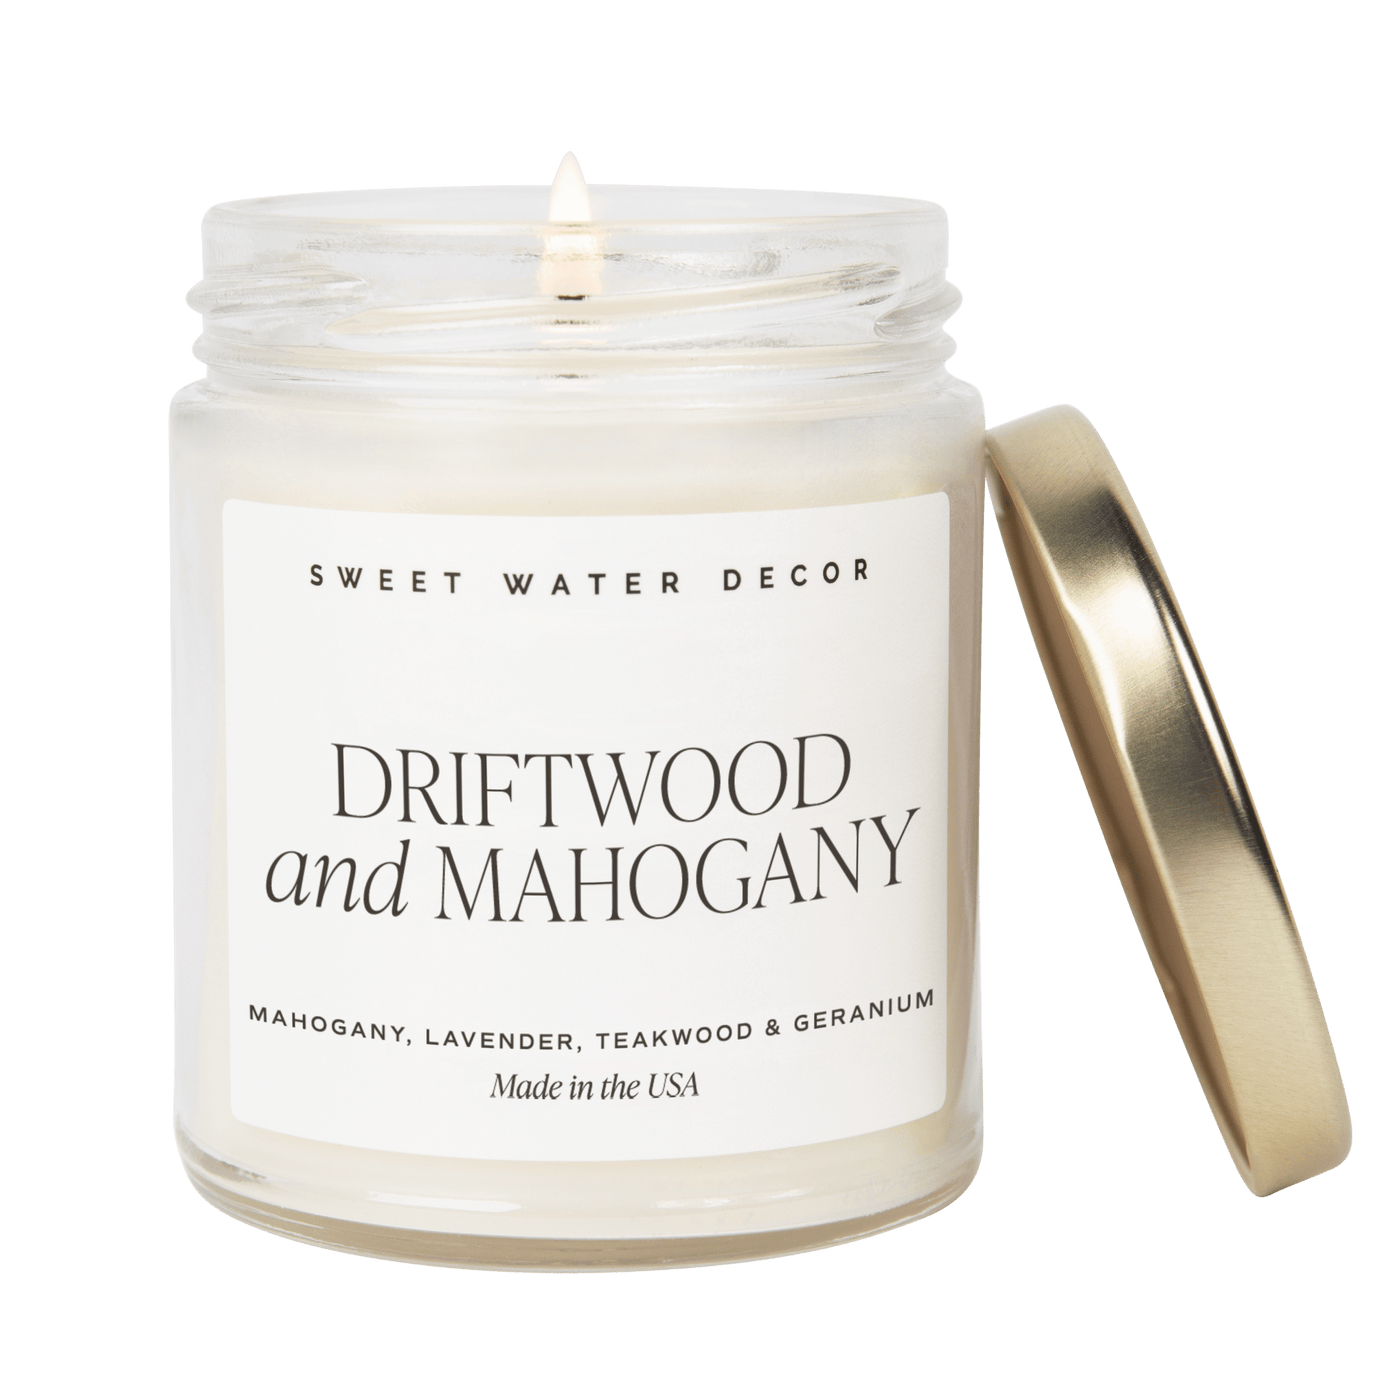 Driftwood and Mahogany Soy Candle - Clear Jar - 9 oz - Sweet Water Decor - Candles